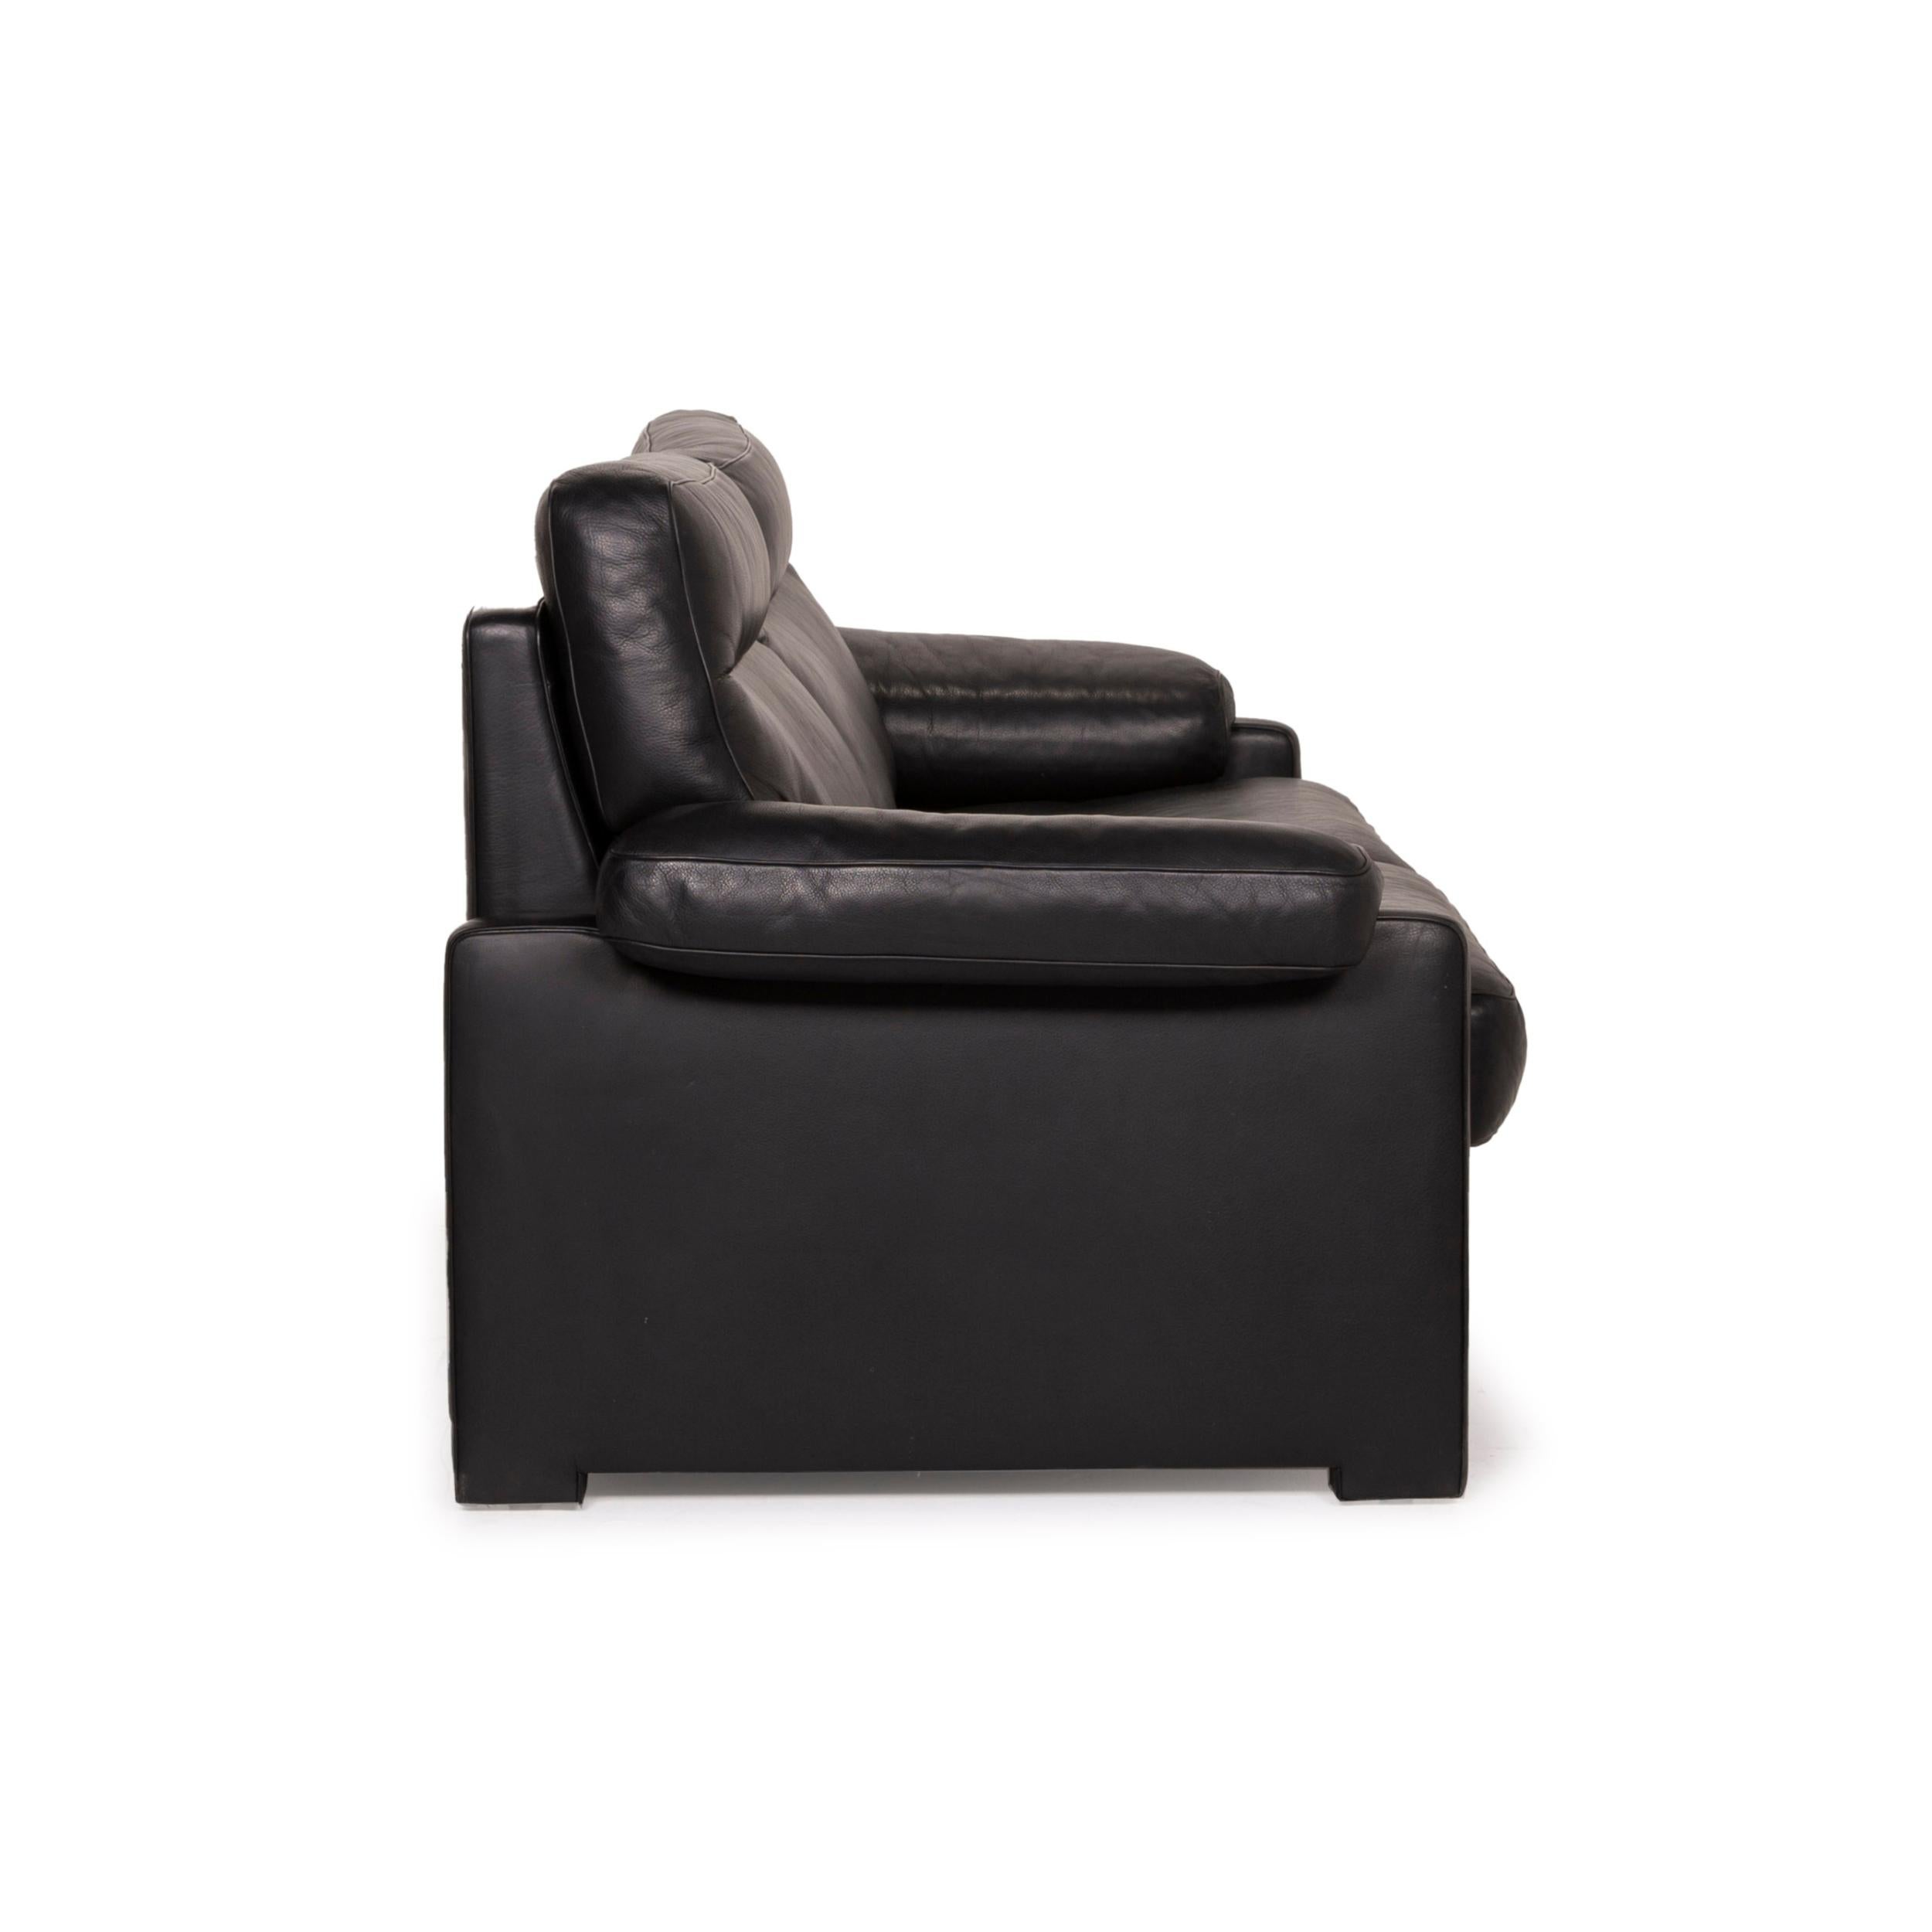 De Sede Ds 70 Leather Sofa Set Black 1x Three-Seater 1x Two-Seater Set For Sale 3